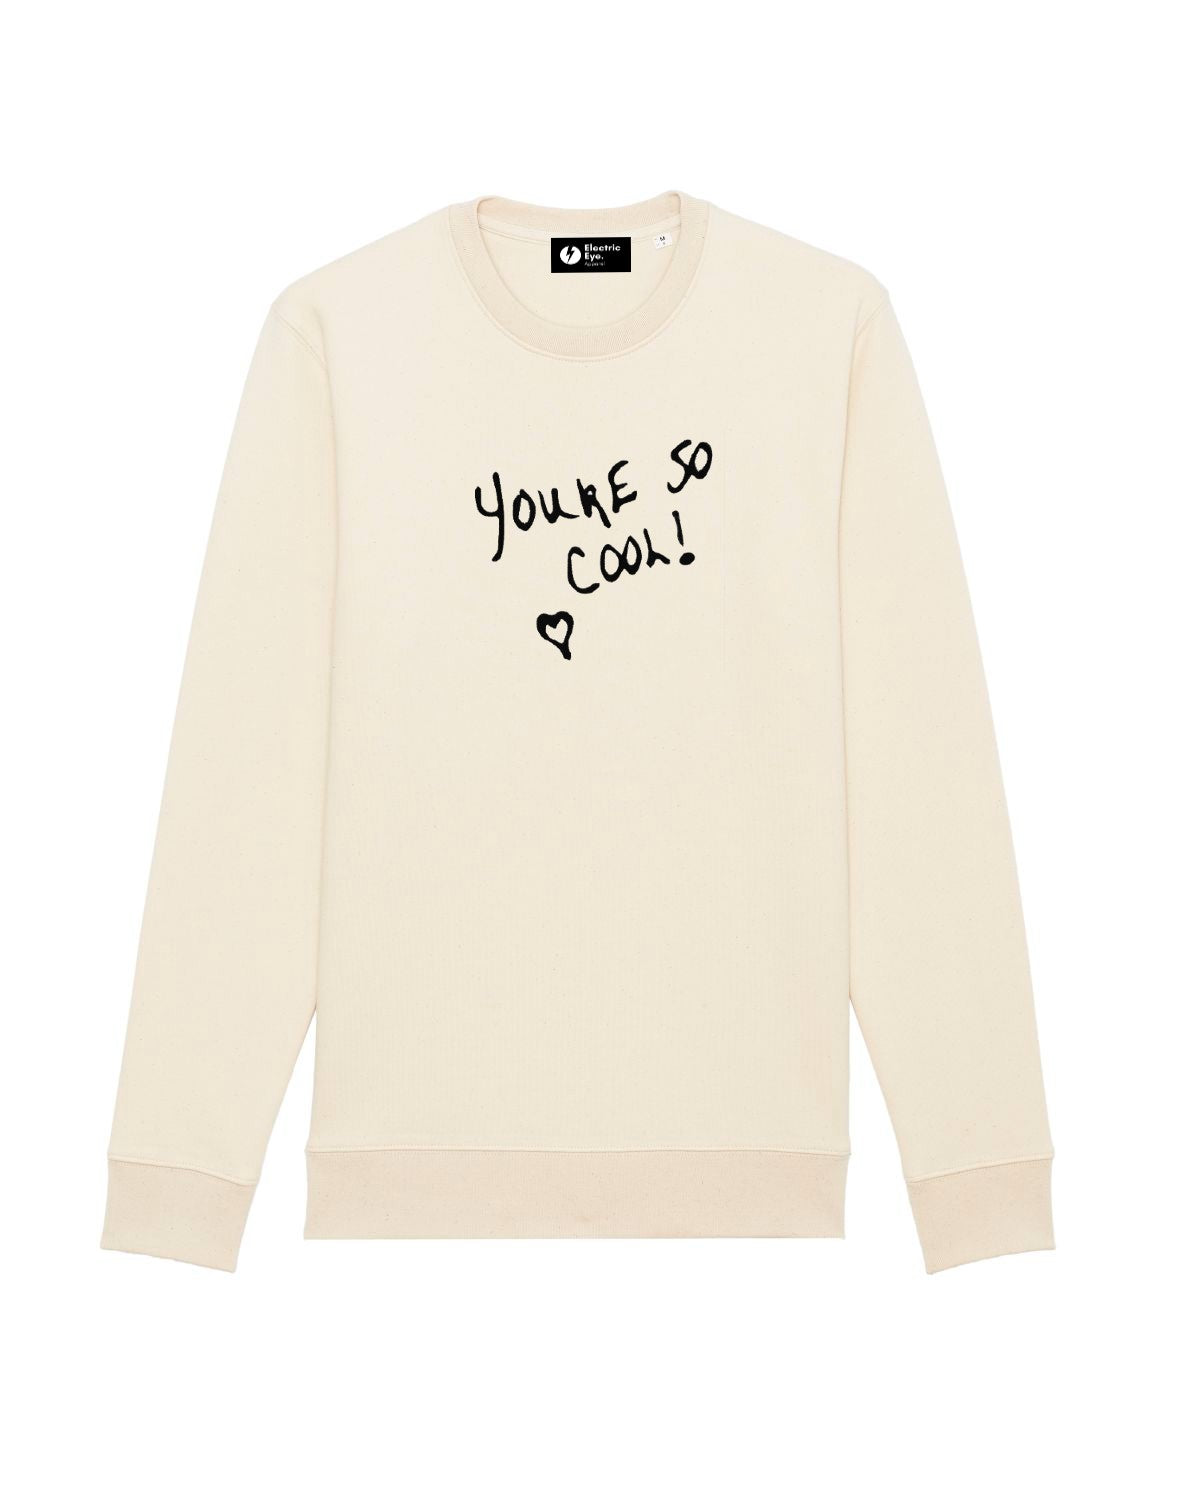 'YOU'RE SO COOL' EMBROIDERED UNISEX ORGANIC COTTON CHANGER SWEATSHIRT